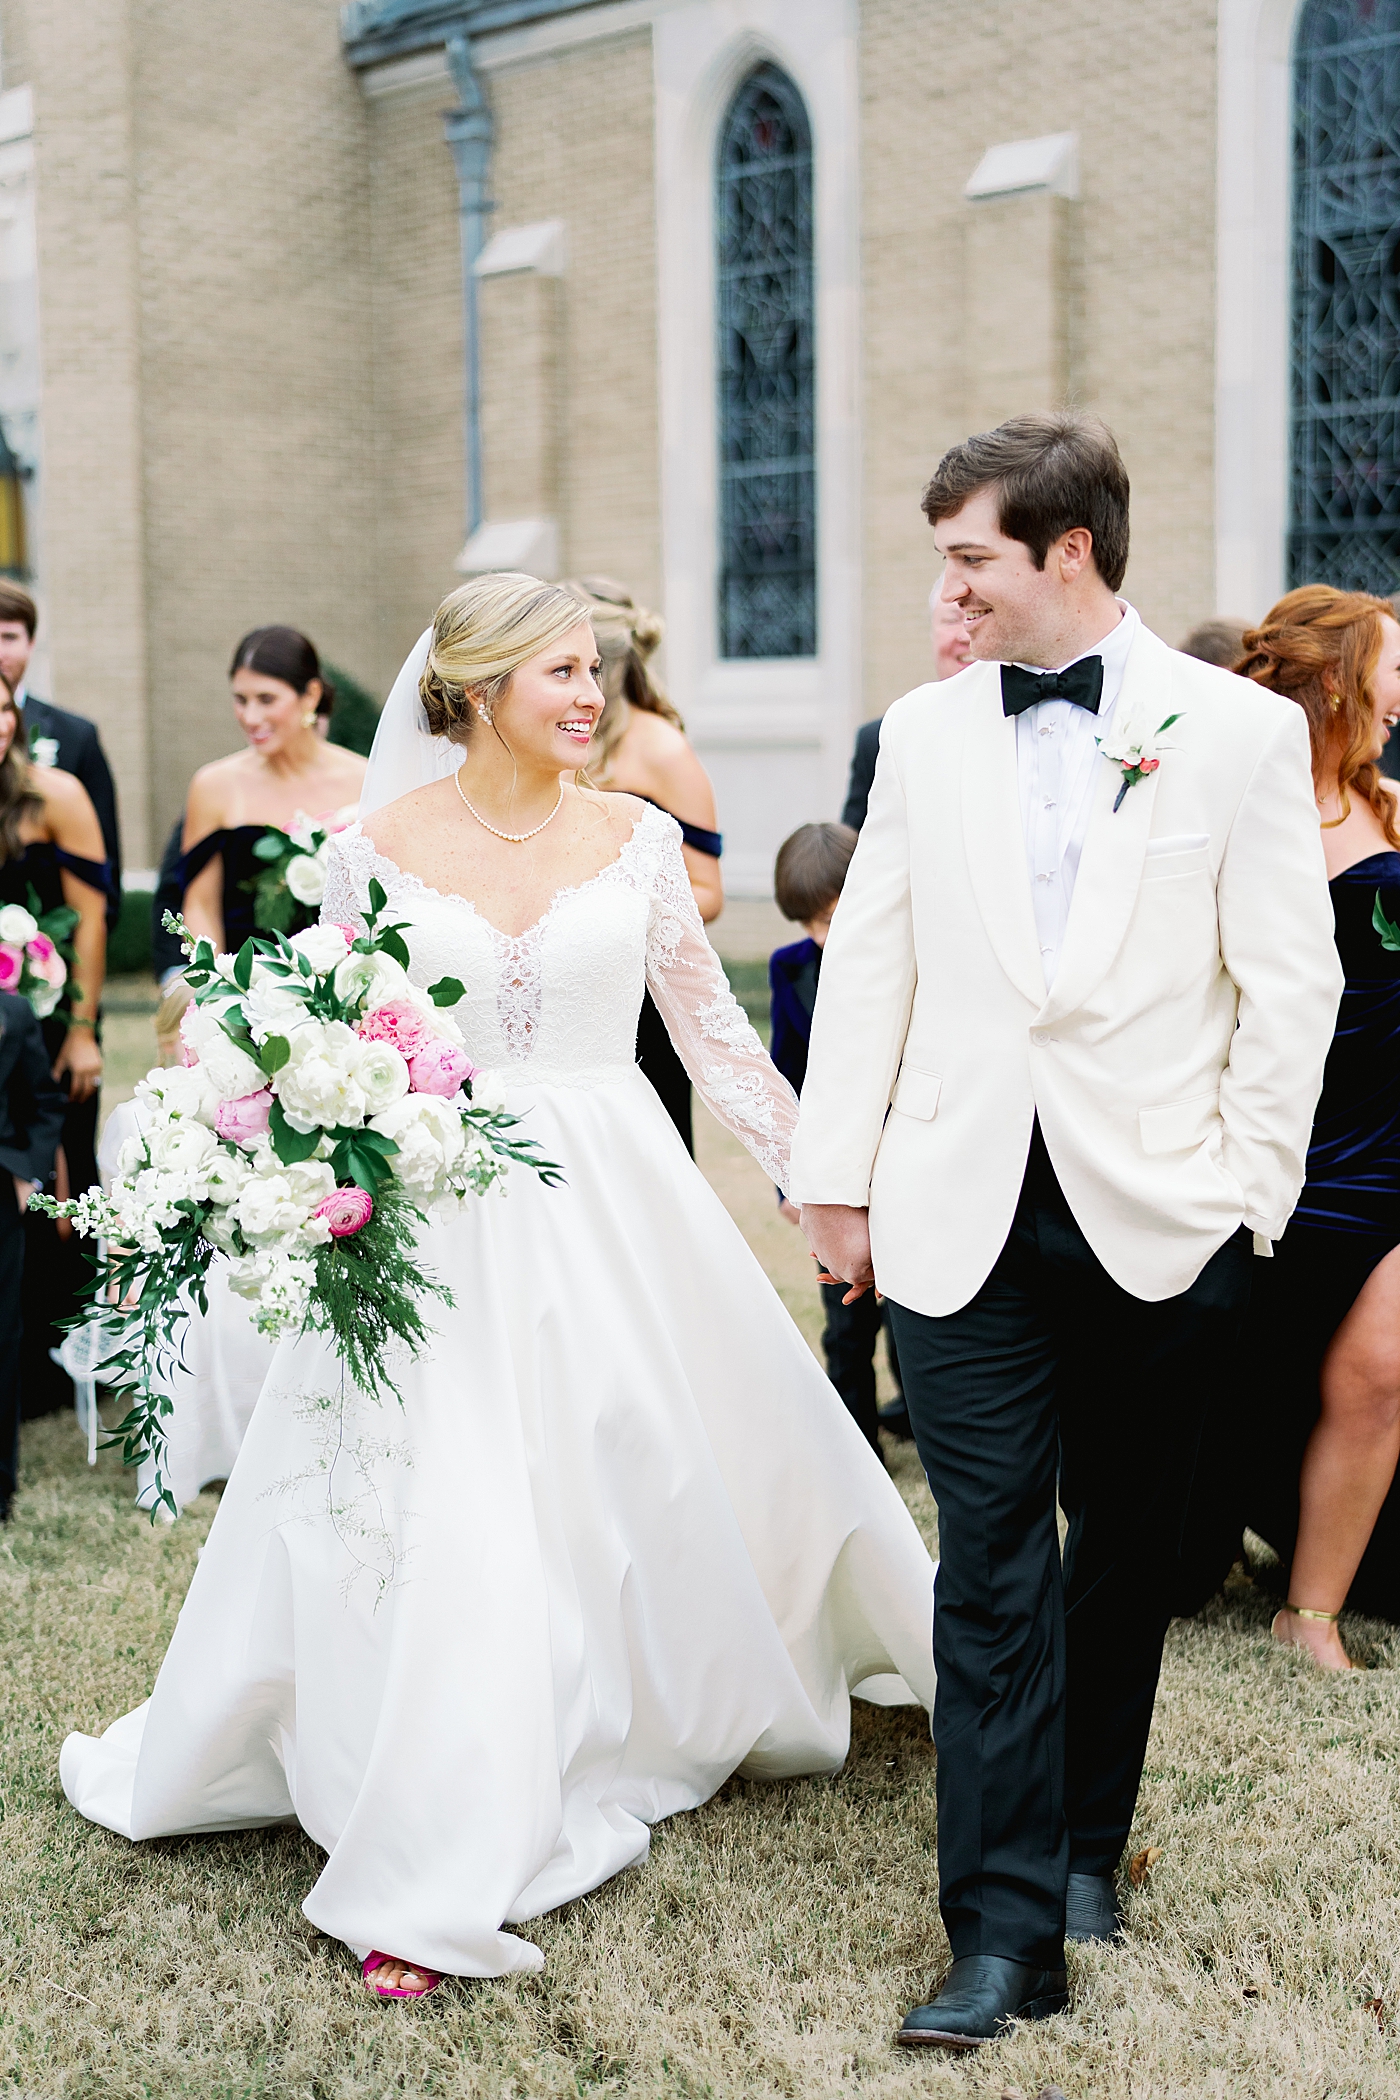 Couple holding hands with their wedding party in the background | Image by Annie Laura Photo